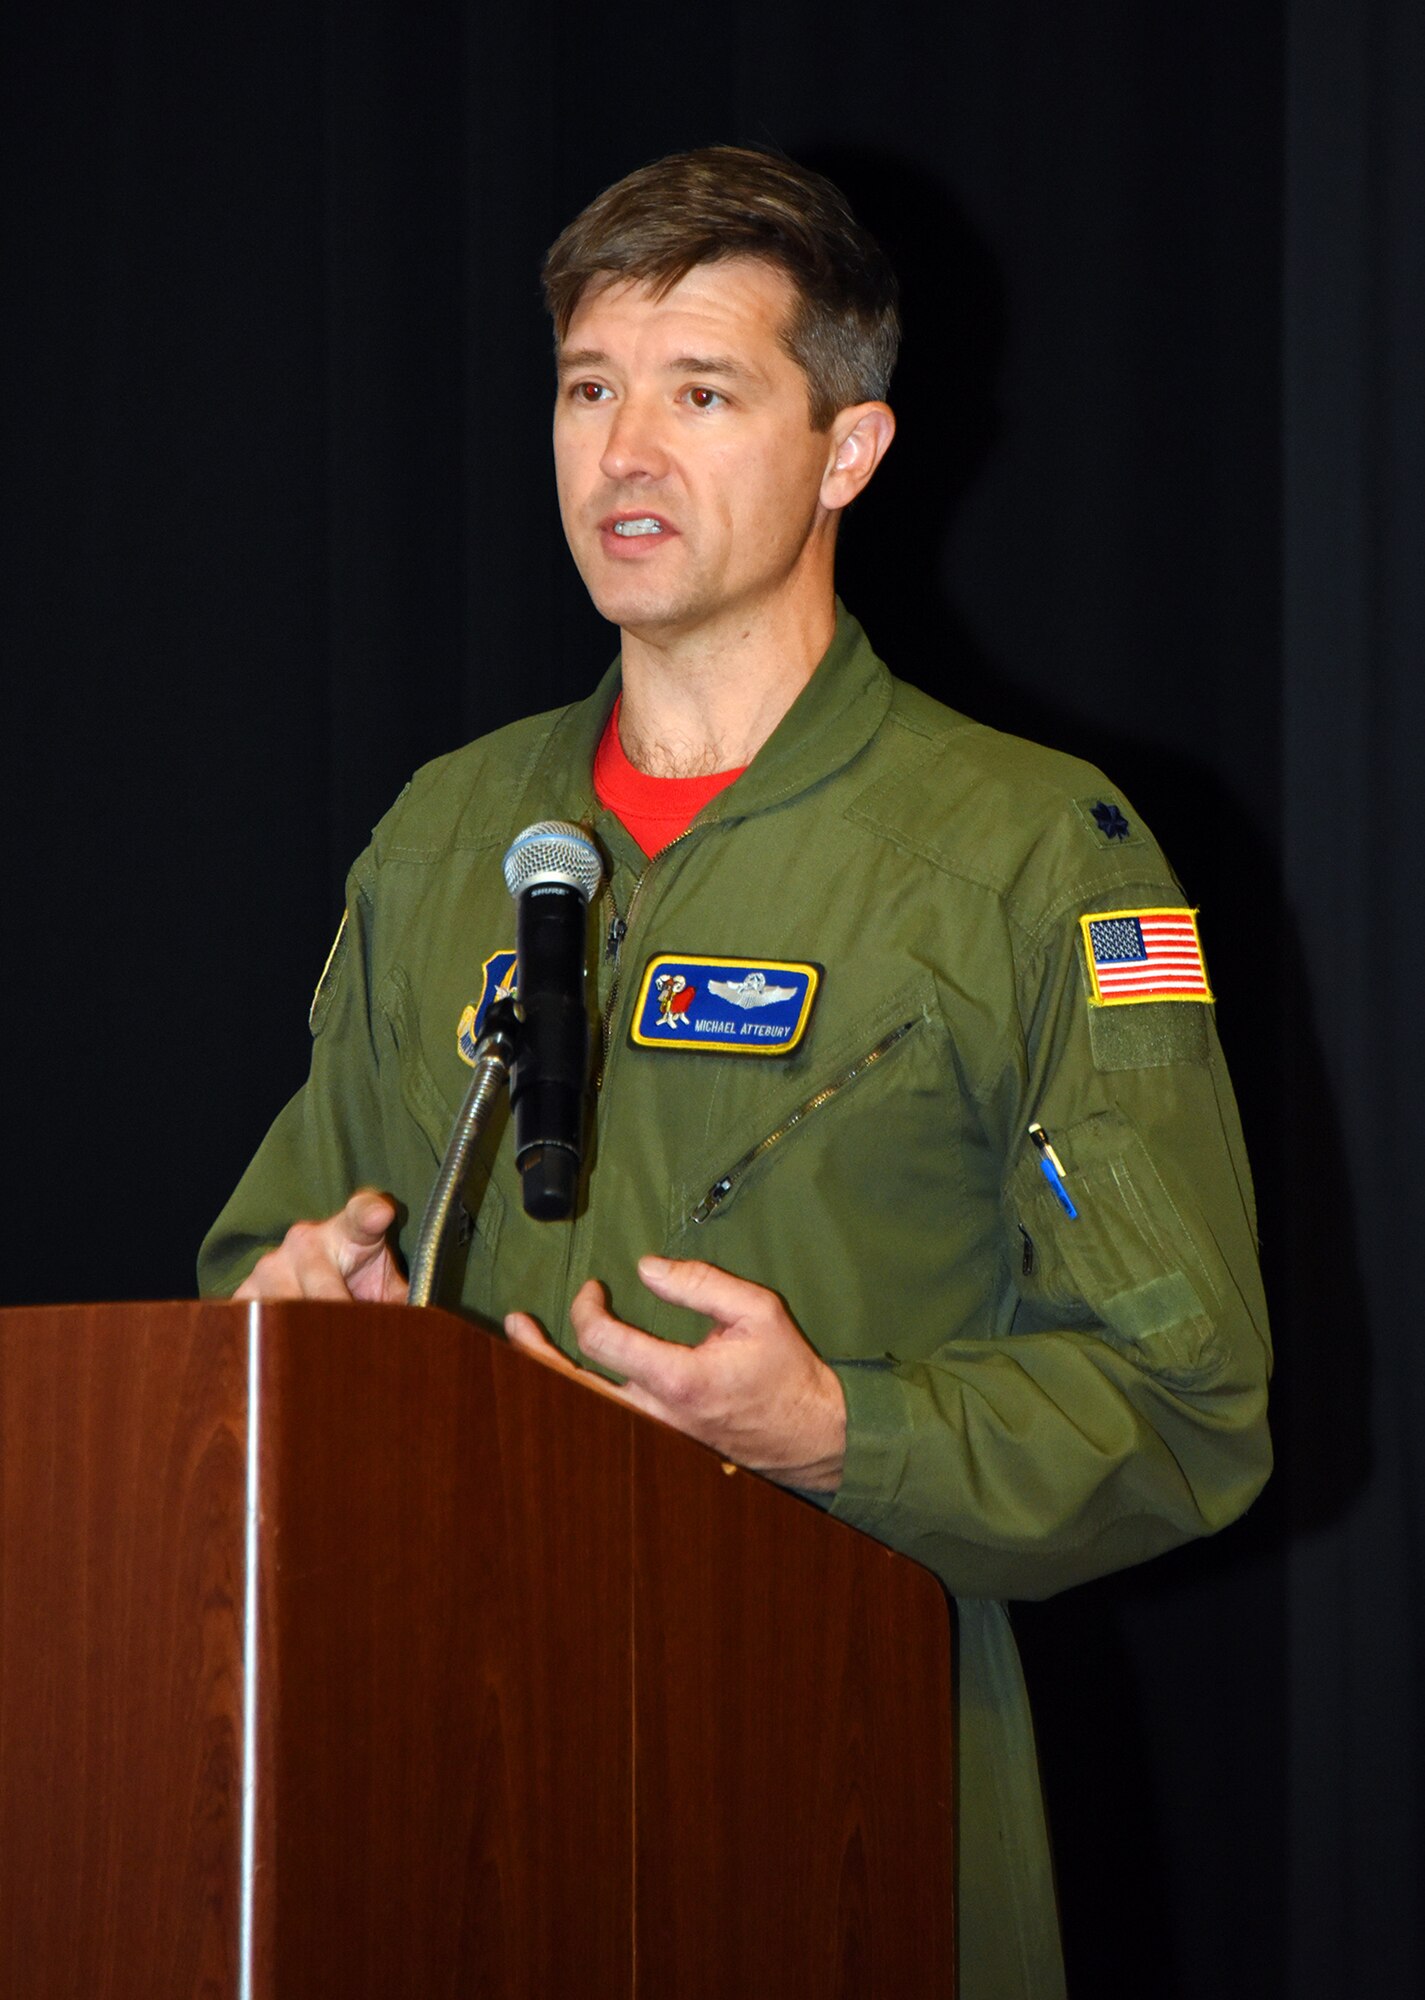 U.S. Air Force Lt. Col. Michael Attebury, 514th Air Mobility Wing flight safety officer, speaks to Airmen at the symposium.